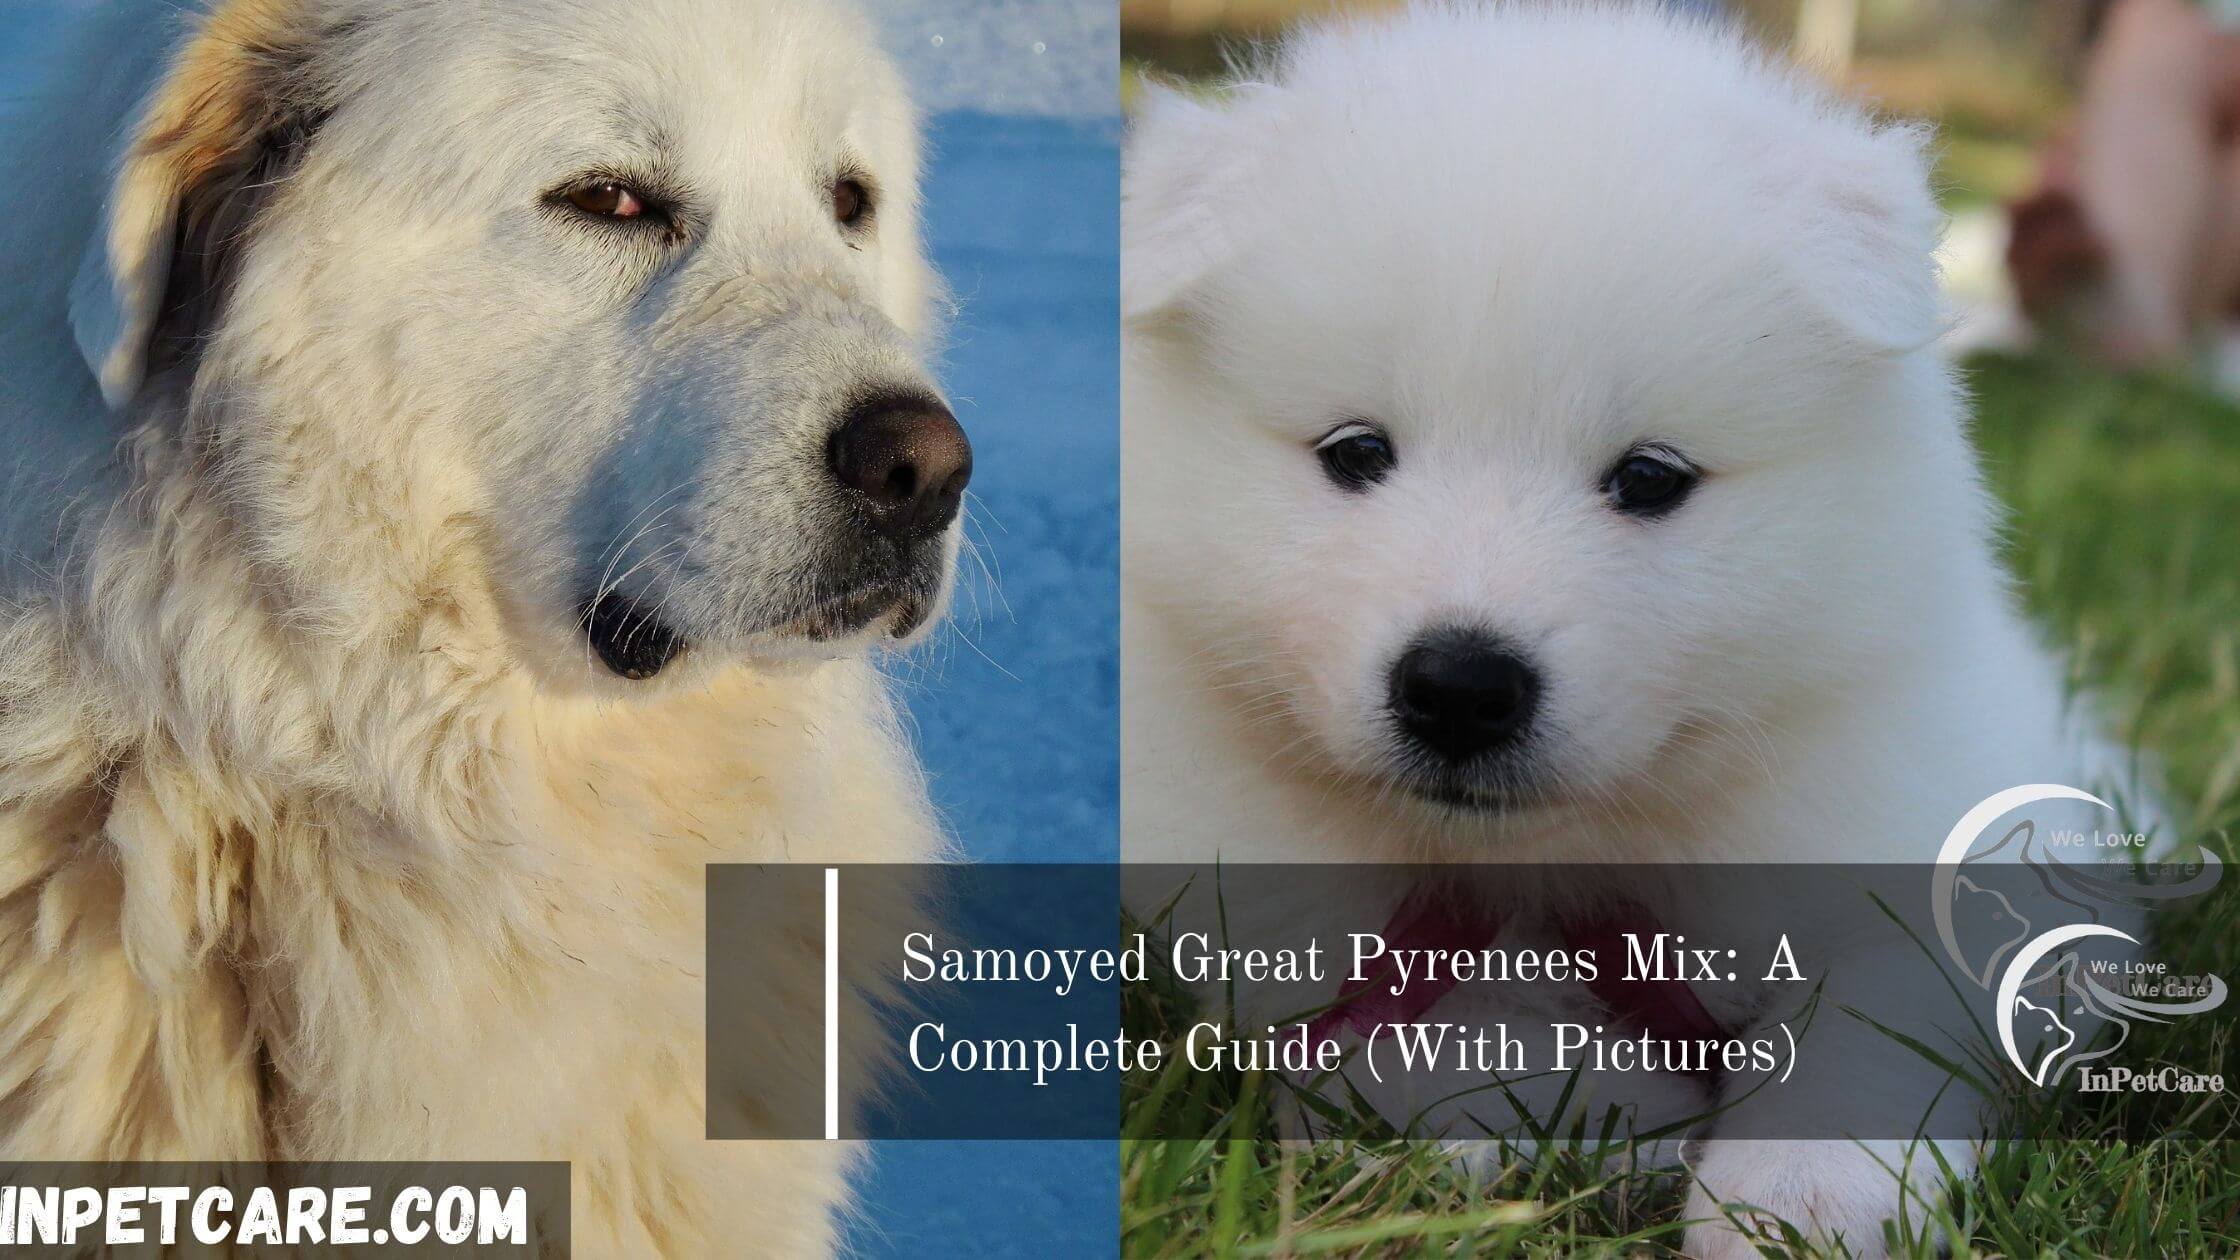 Samoyed Great Pyrenees Mix: A Complete Guide (With Pictures)